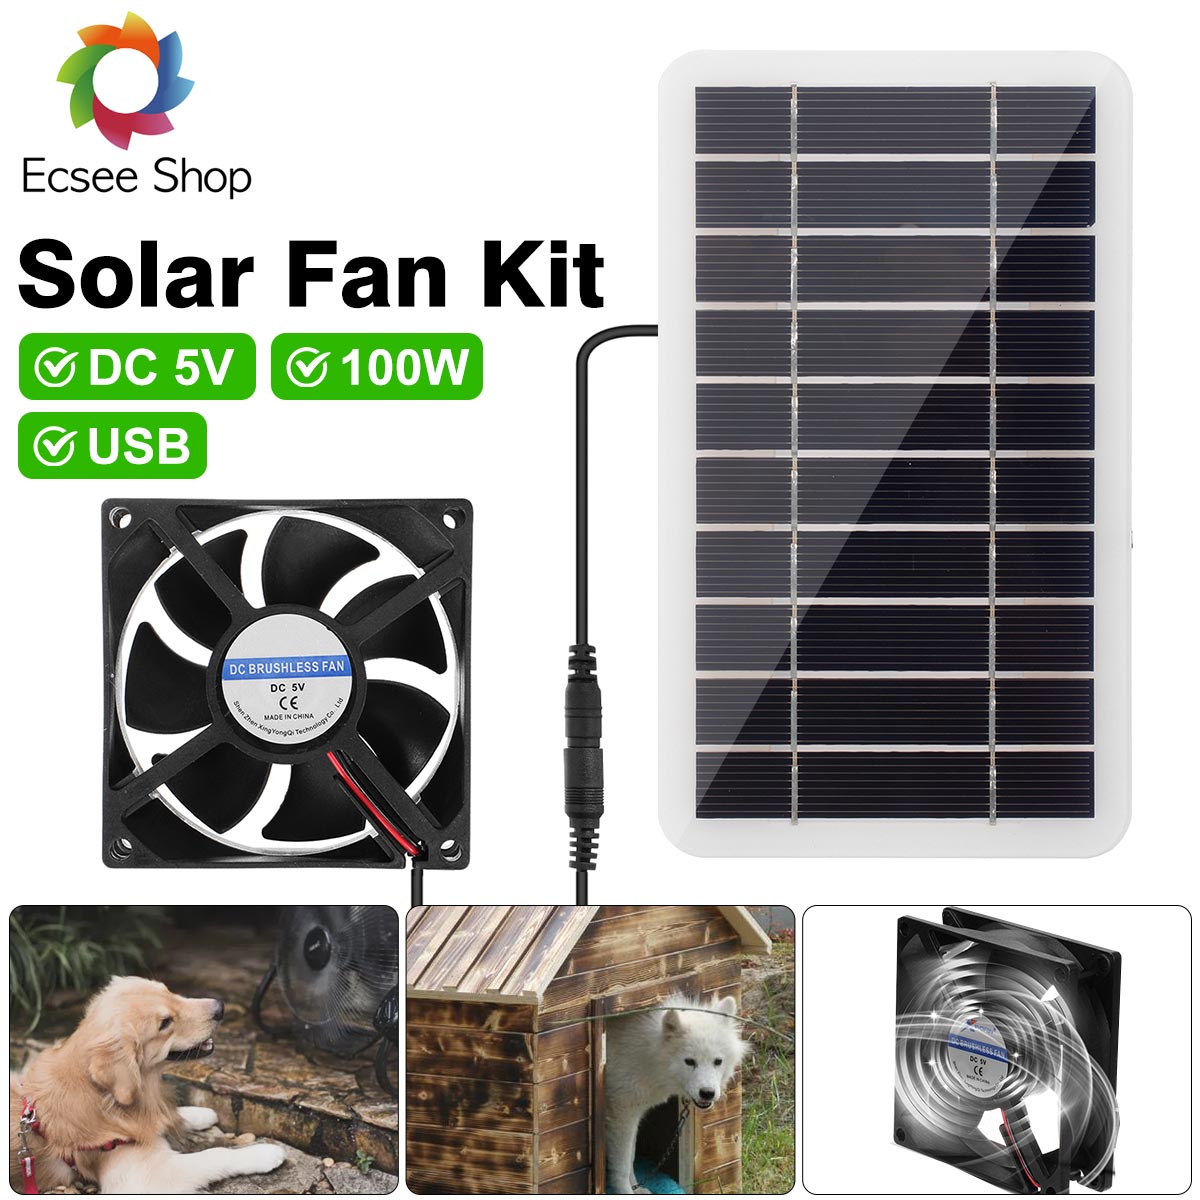 100W-Portable-Solar-Panel-Kit-Dual-DC-5V-USB-Charger-Kit-Solar-Power-Controller-with-Fans-1905897-4